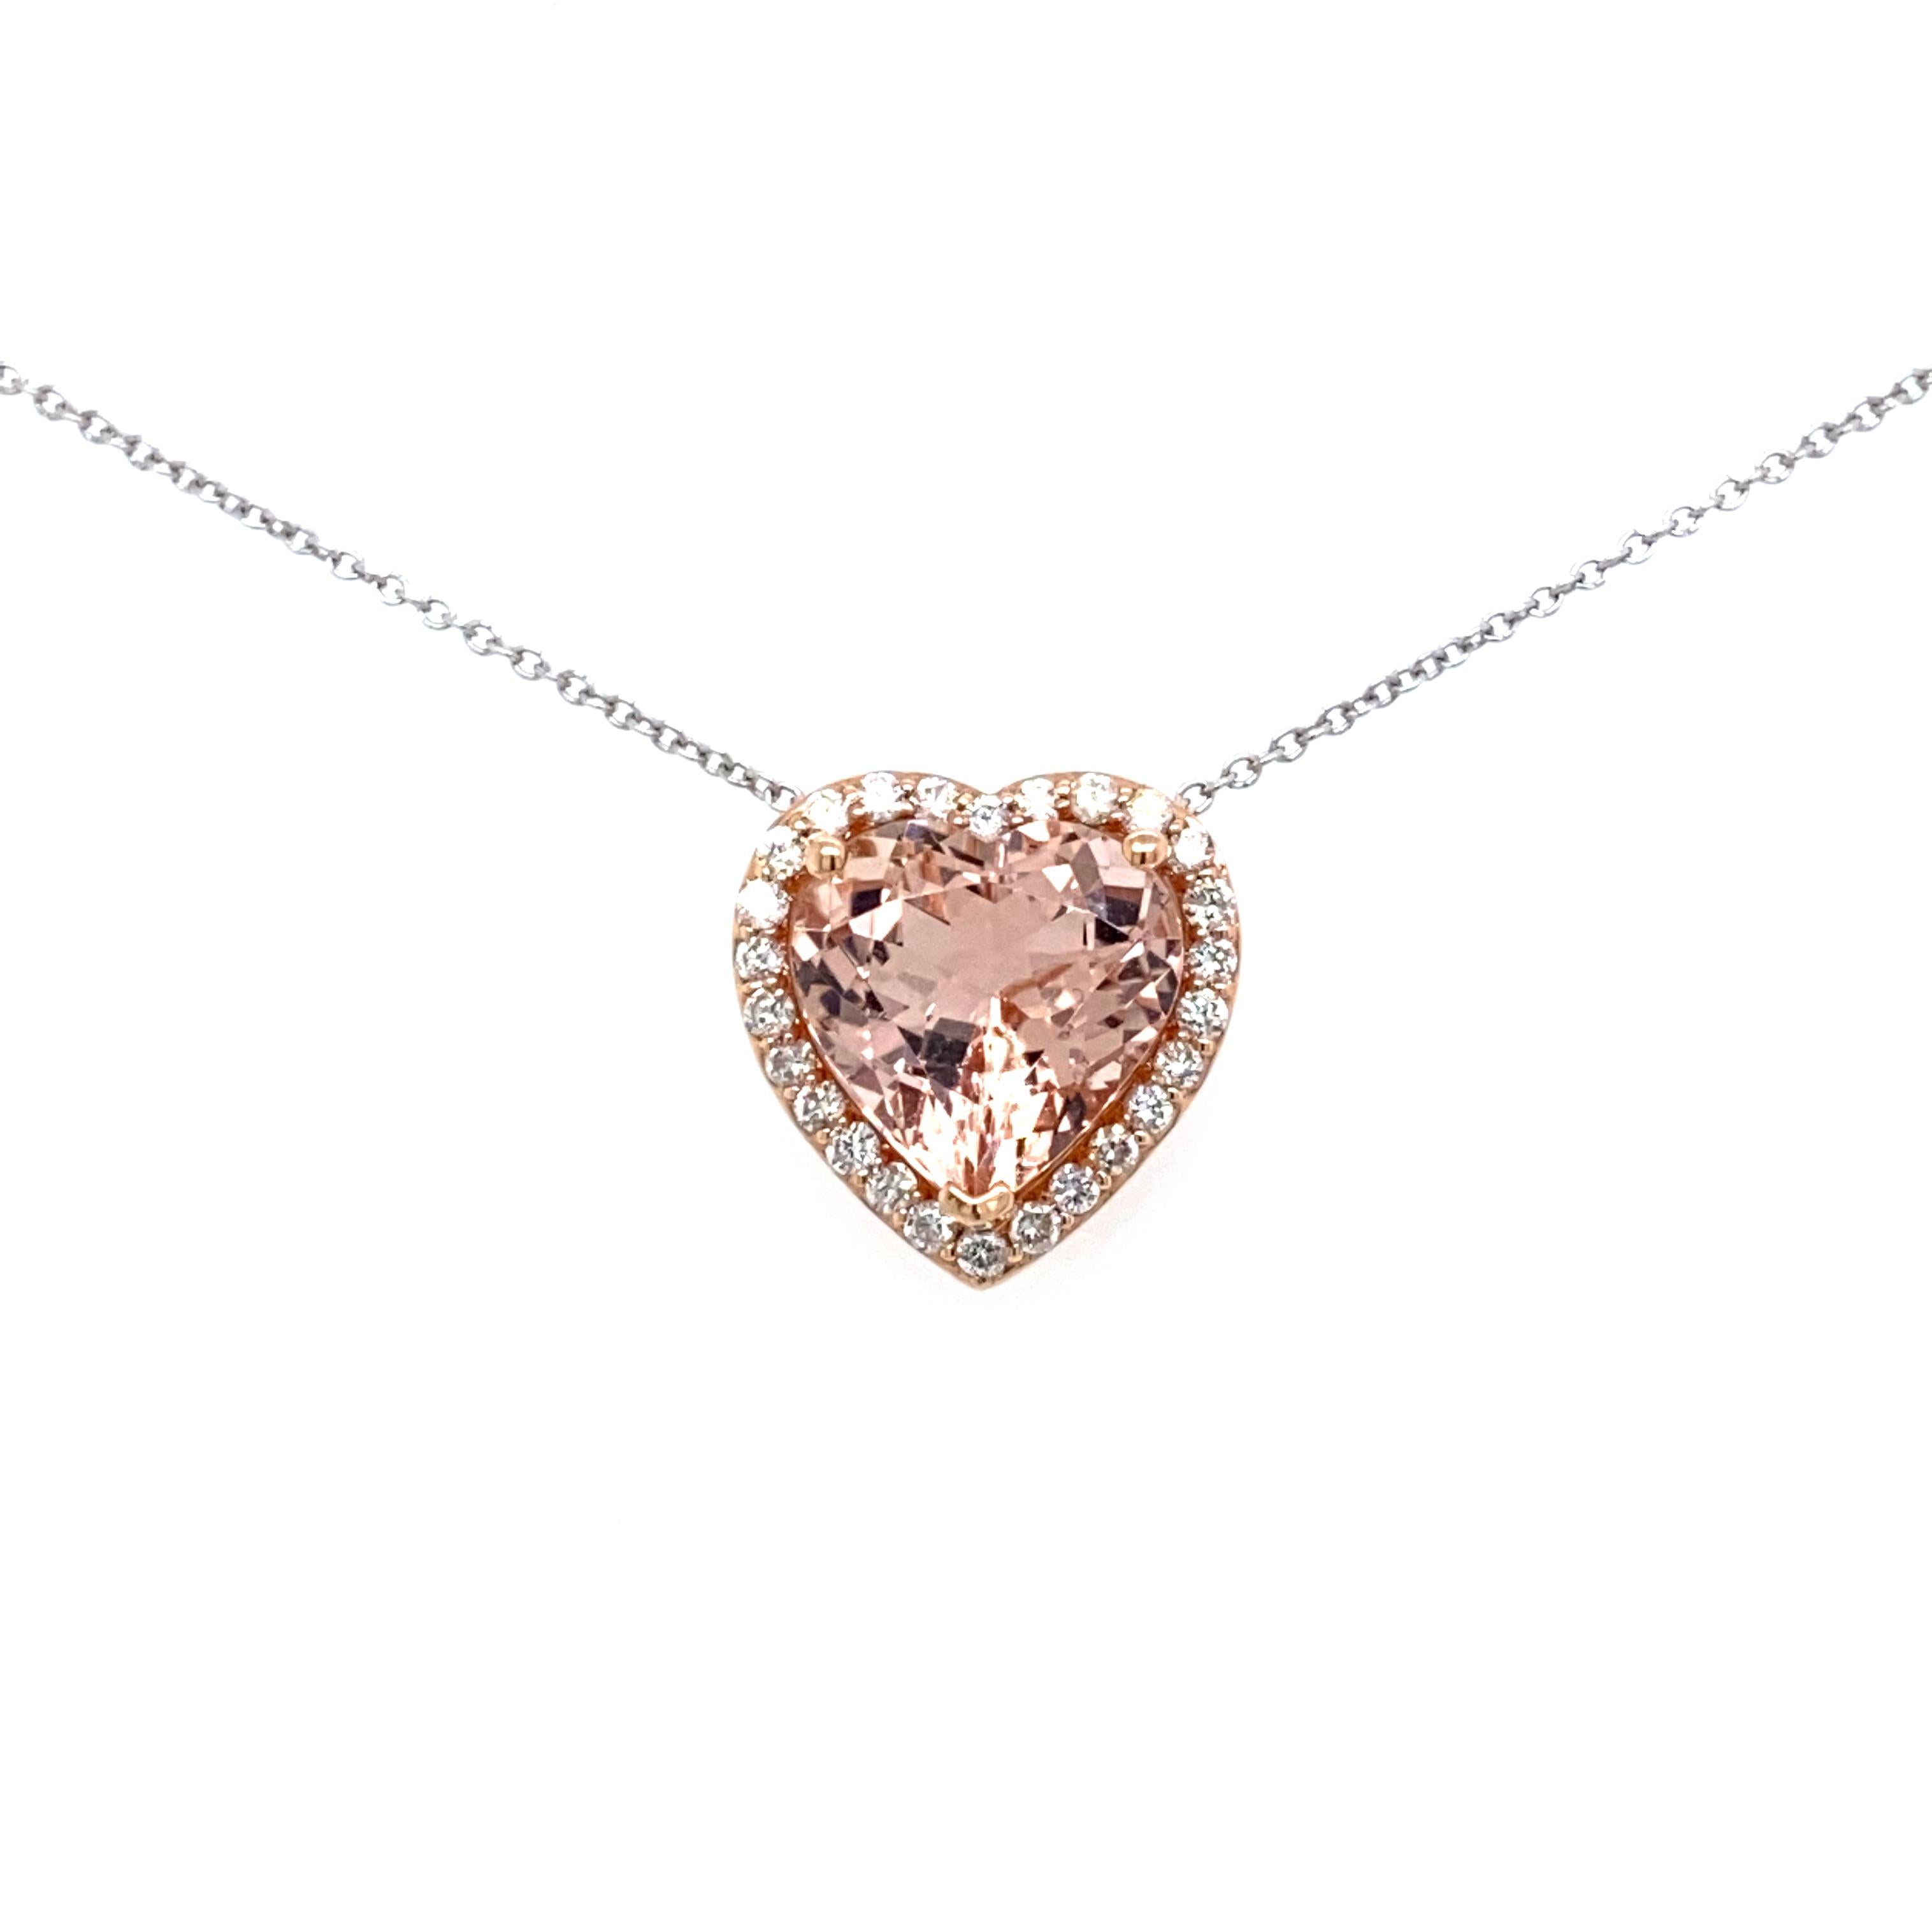 This is an exceptional natural heart-shaped morganite and diamond pendant set in solid 14K rose gold. The fancy 11MM heart morganite has an excellent peachy pink color and is surrounded by a halo of round-cut white diamonds. The pendant is stamped